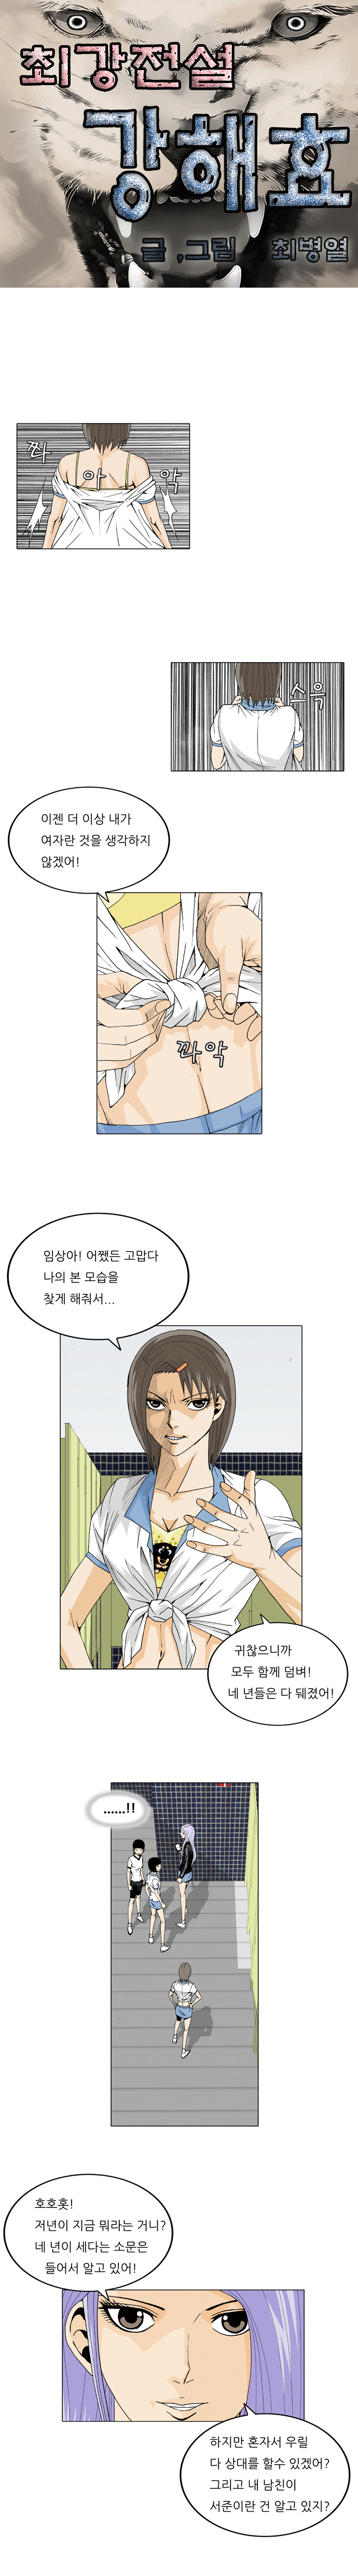 Ultimate Legend - Kang Hae Hyo - Chapter 20 - Page 2